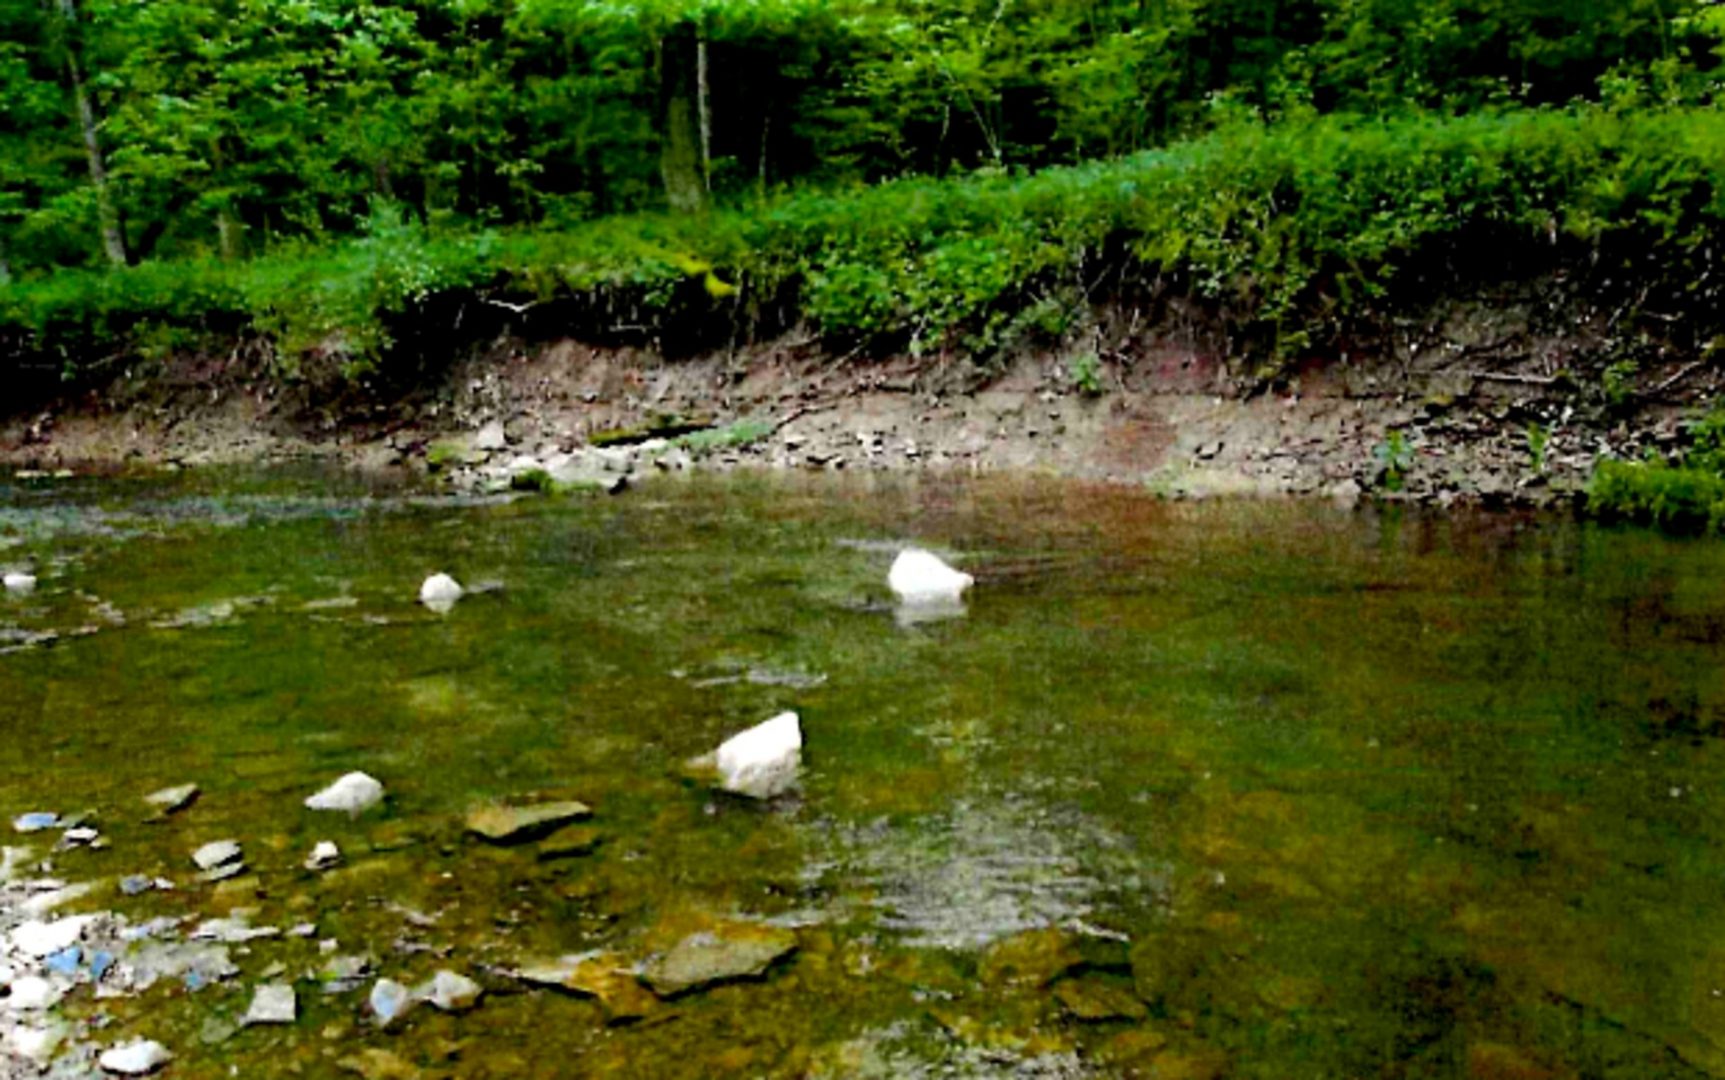 A failing stream bank along Mingo Creek in Washington County. CNX agreed to put almost $200,000 toward streambank stabilization and installation of fish habitat structures along the creek as part of an agreement with the DEP over erosion and sediment violations.